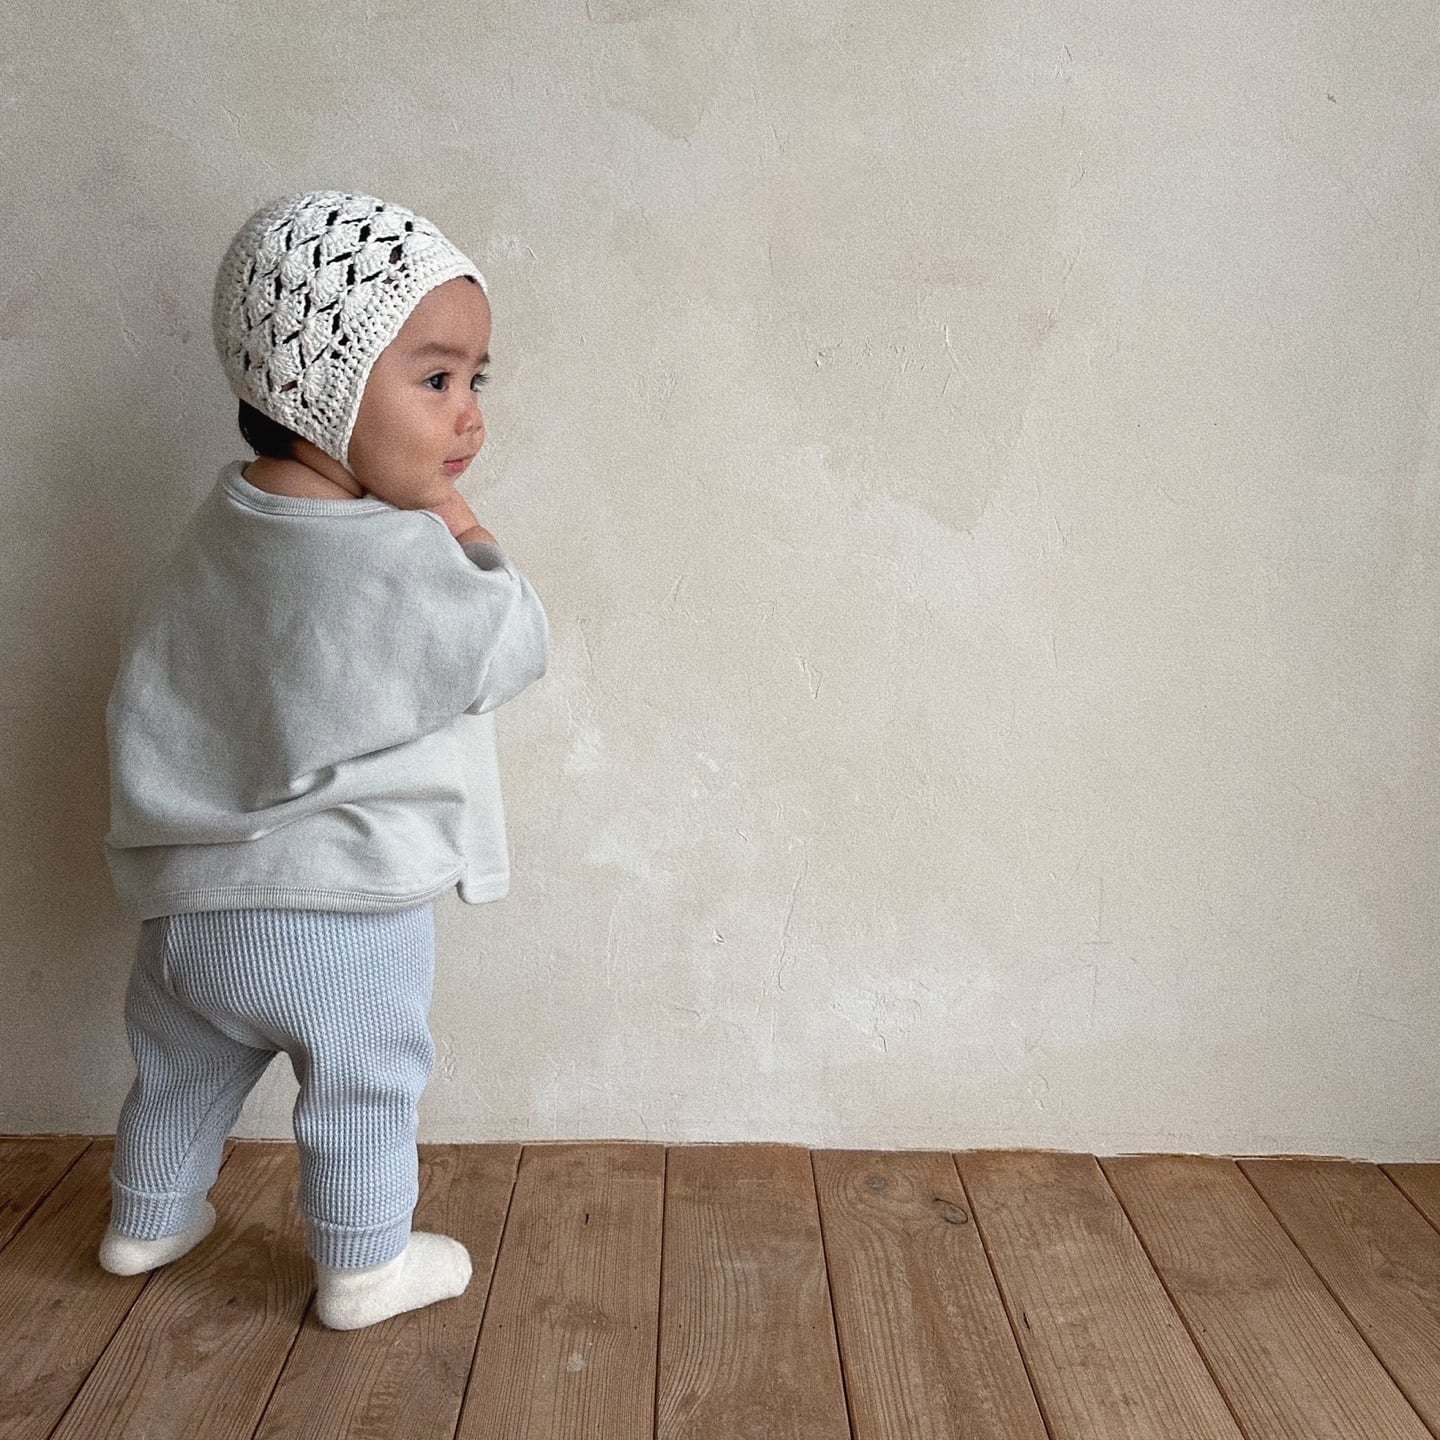 Dandan Waffle Pants find Stylish Fashion for Little People- at Little Foxx Concept Store